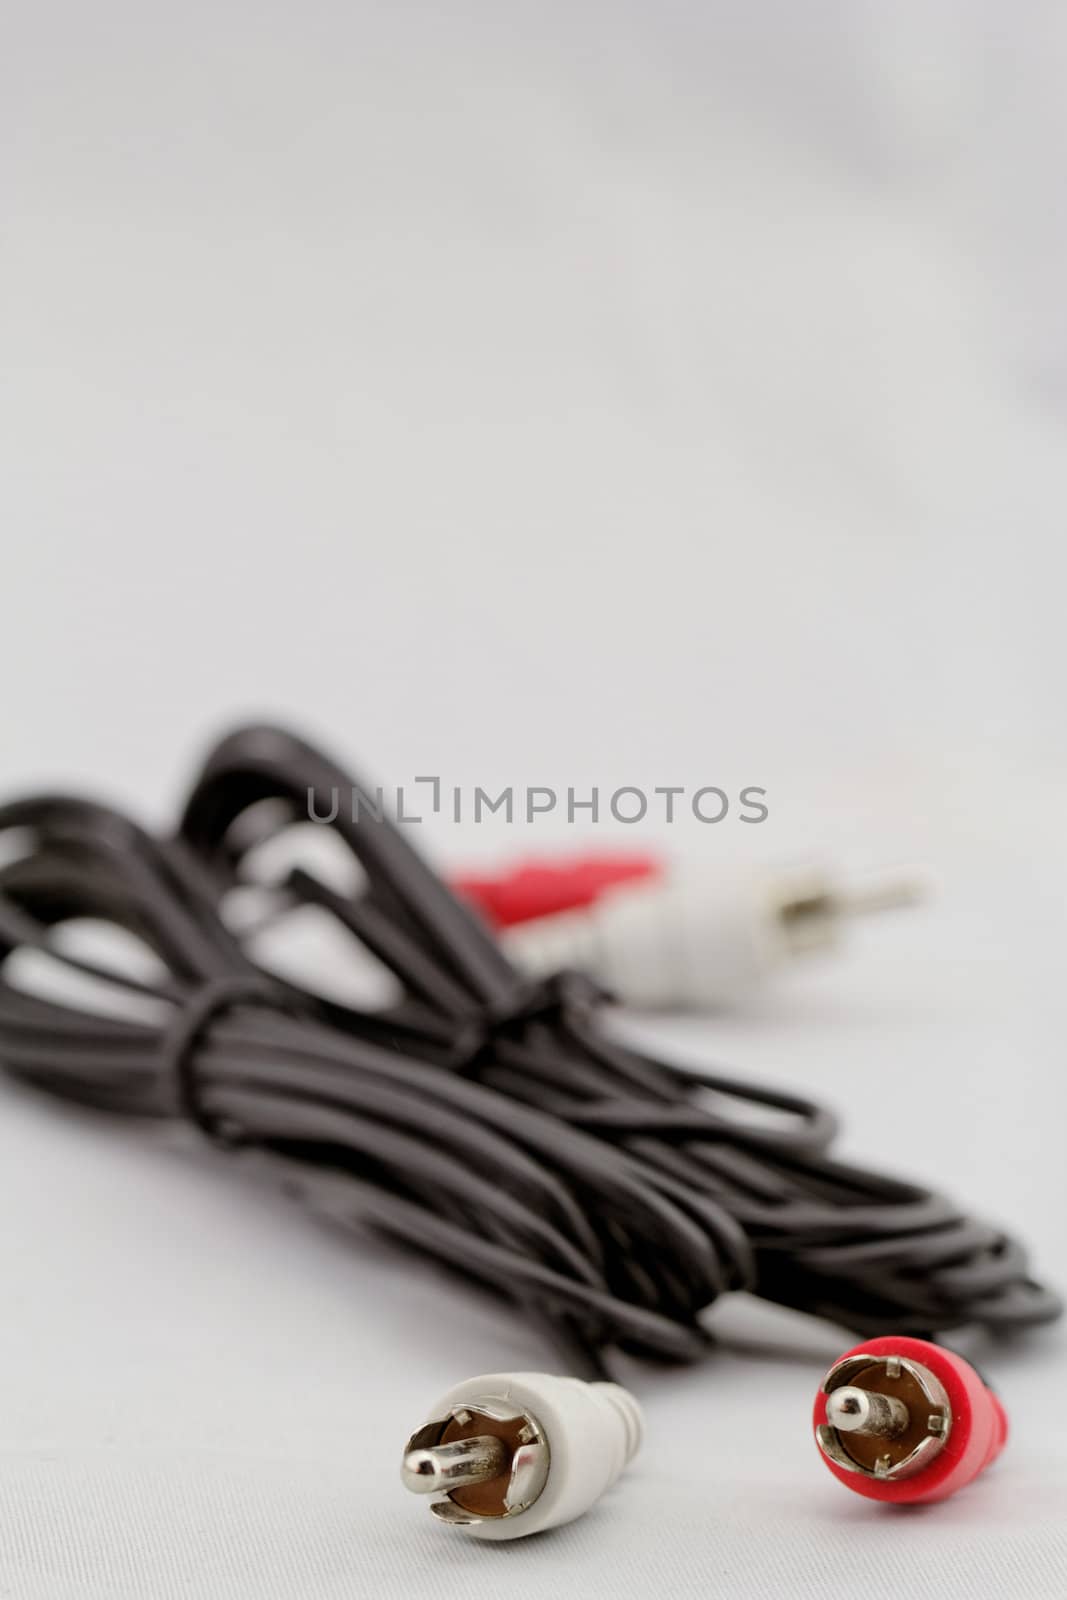 Left-right audio RCA cable on a white background (red white)